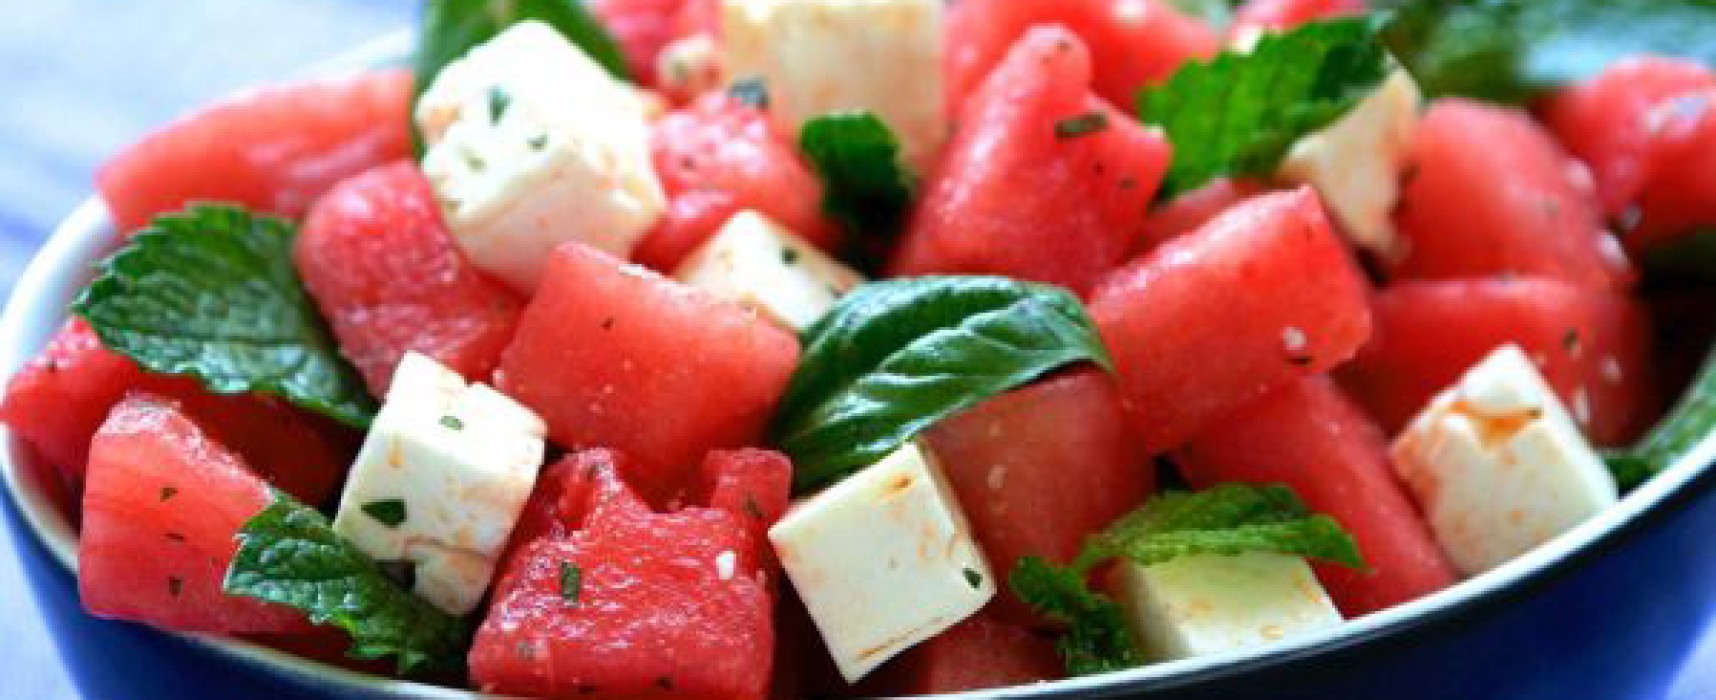 Summer Specials: Sweet And Spicy Watermelon Recipes